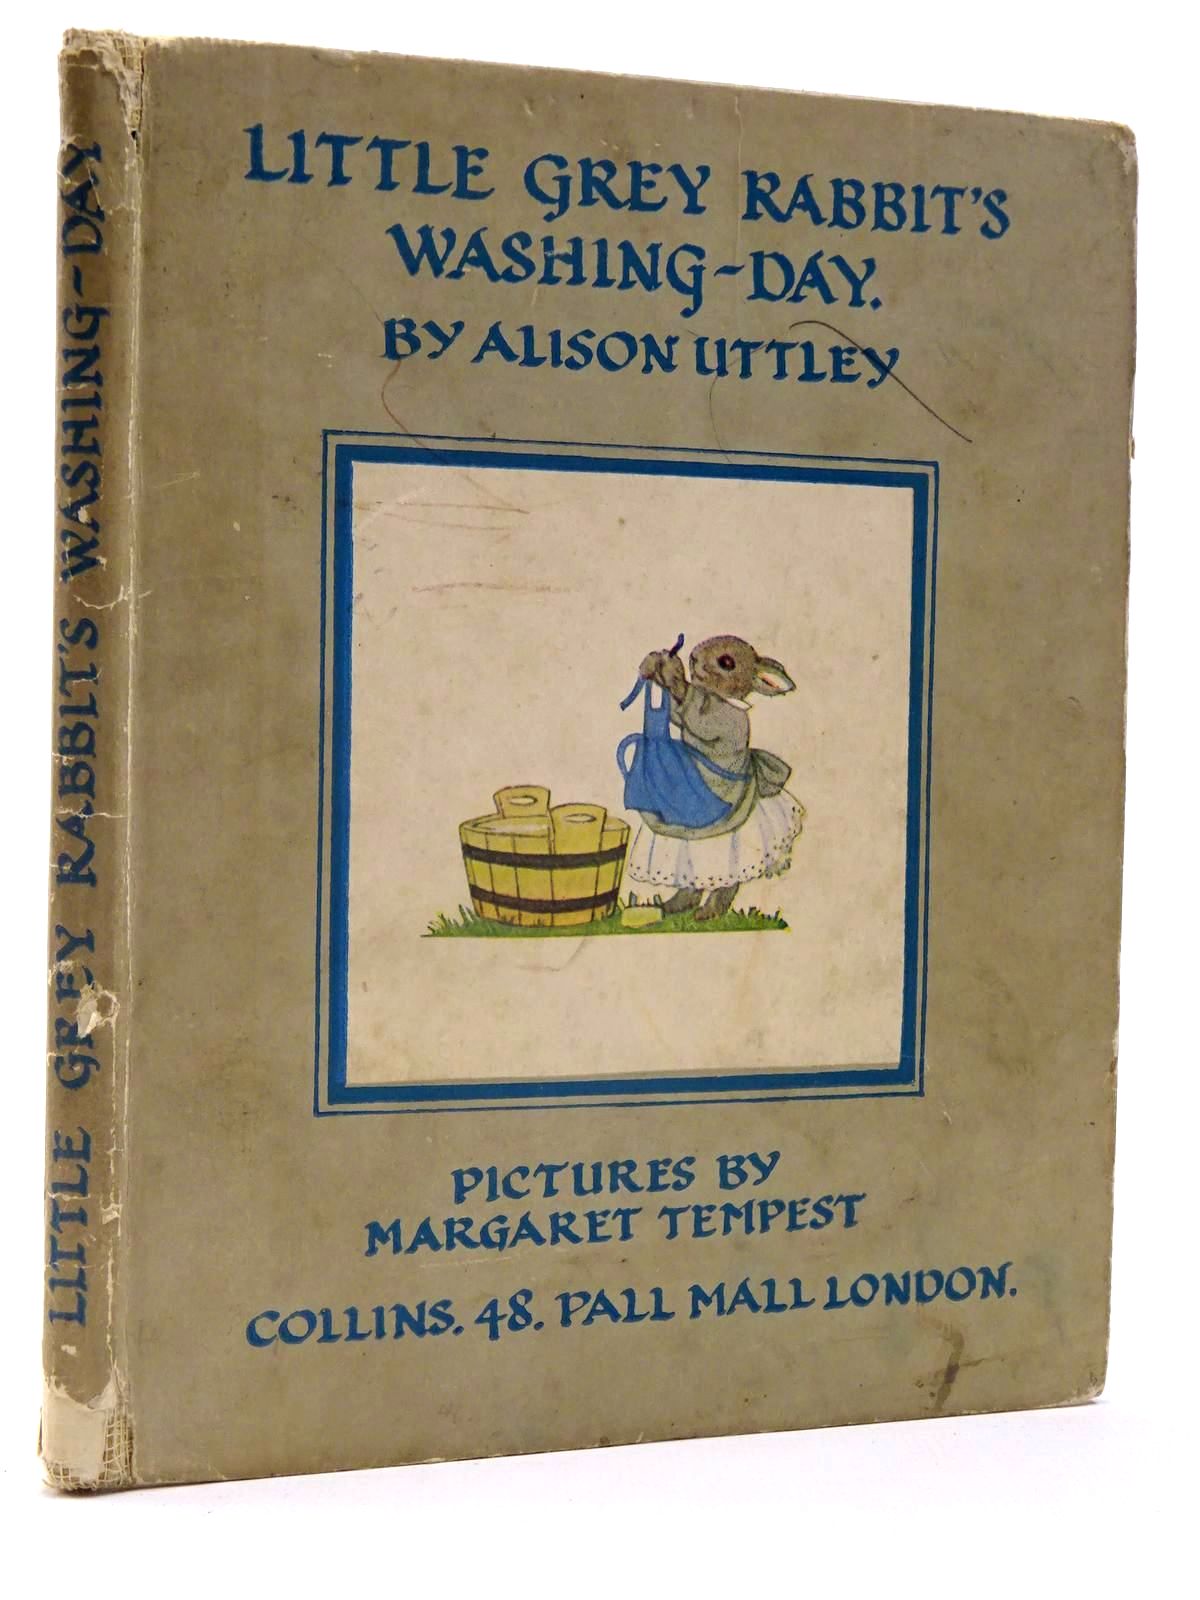 Photo of LITTLE GREY RABBIT'S WASHING-DAY written by Uttley, Alison illustrated by Tempest, Margaret published by Collins (STOCK CODE: 2130240)  for sale by Stella & Rose's Books